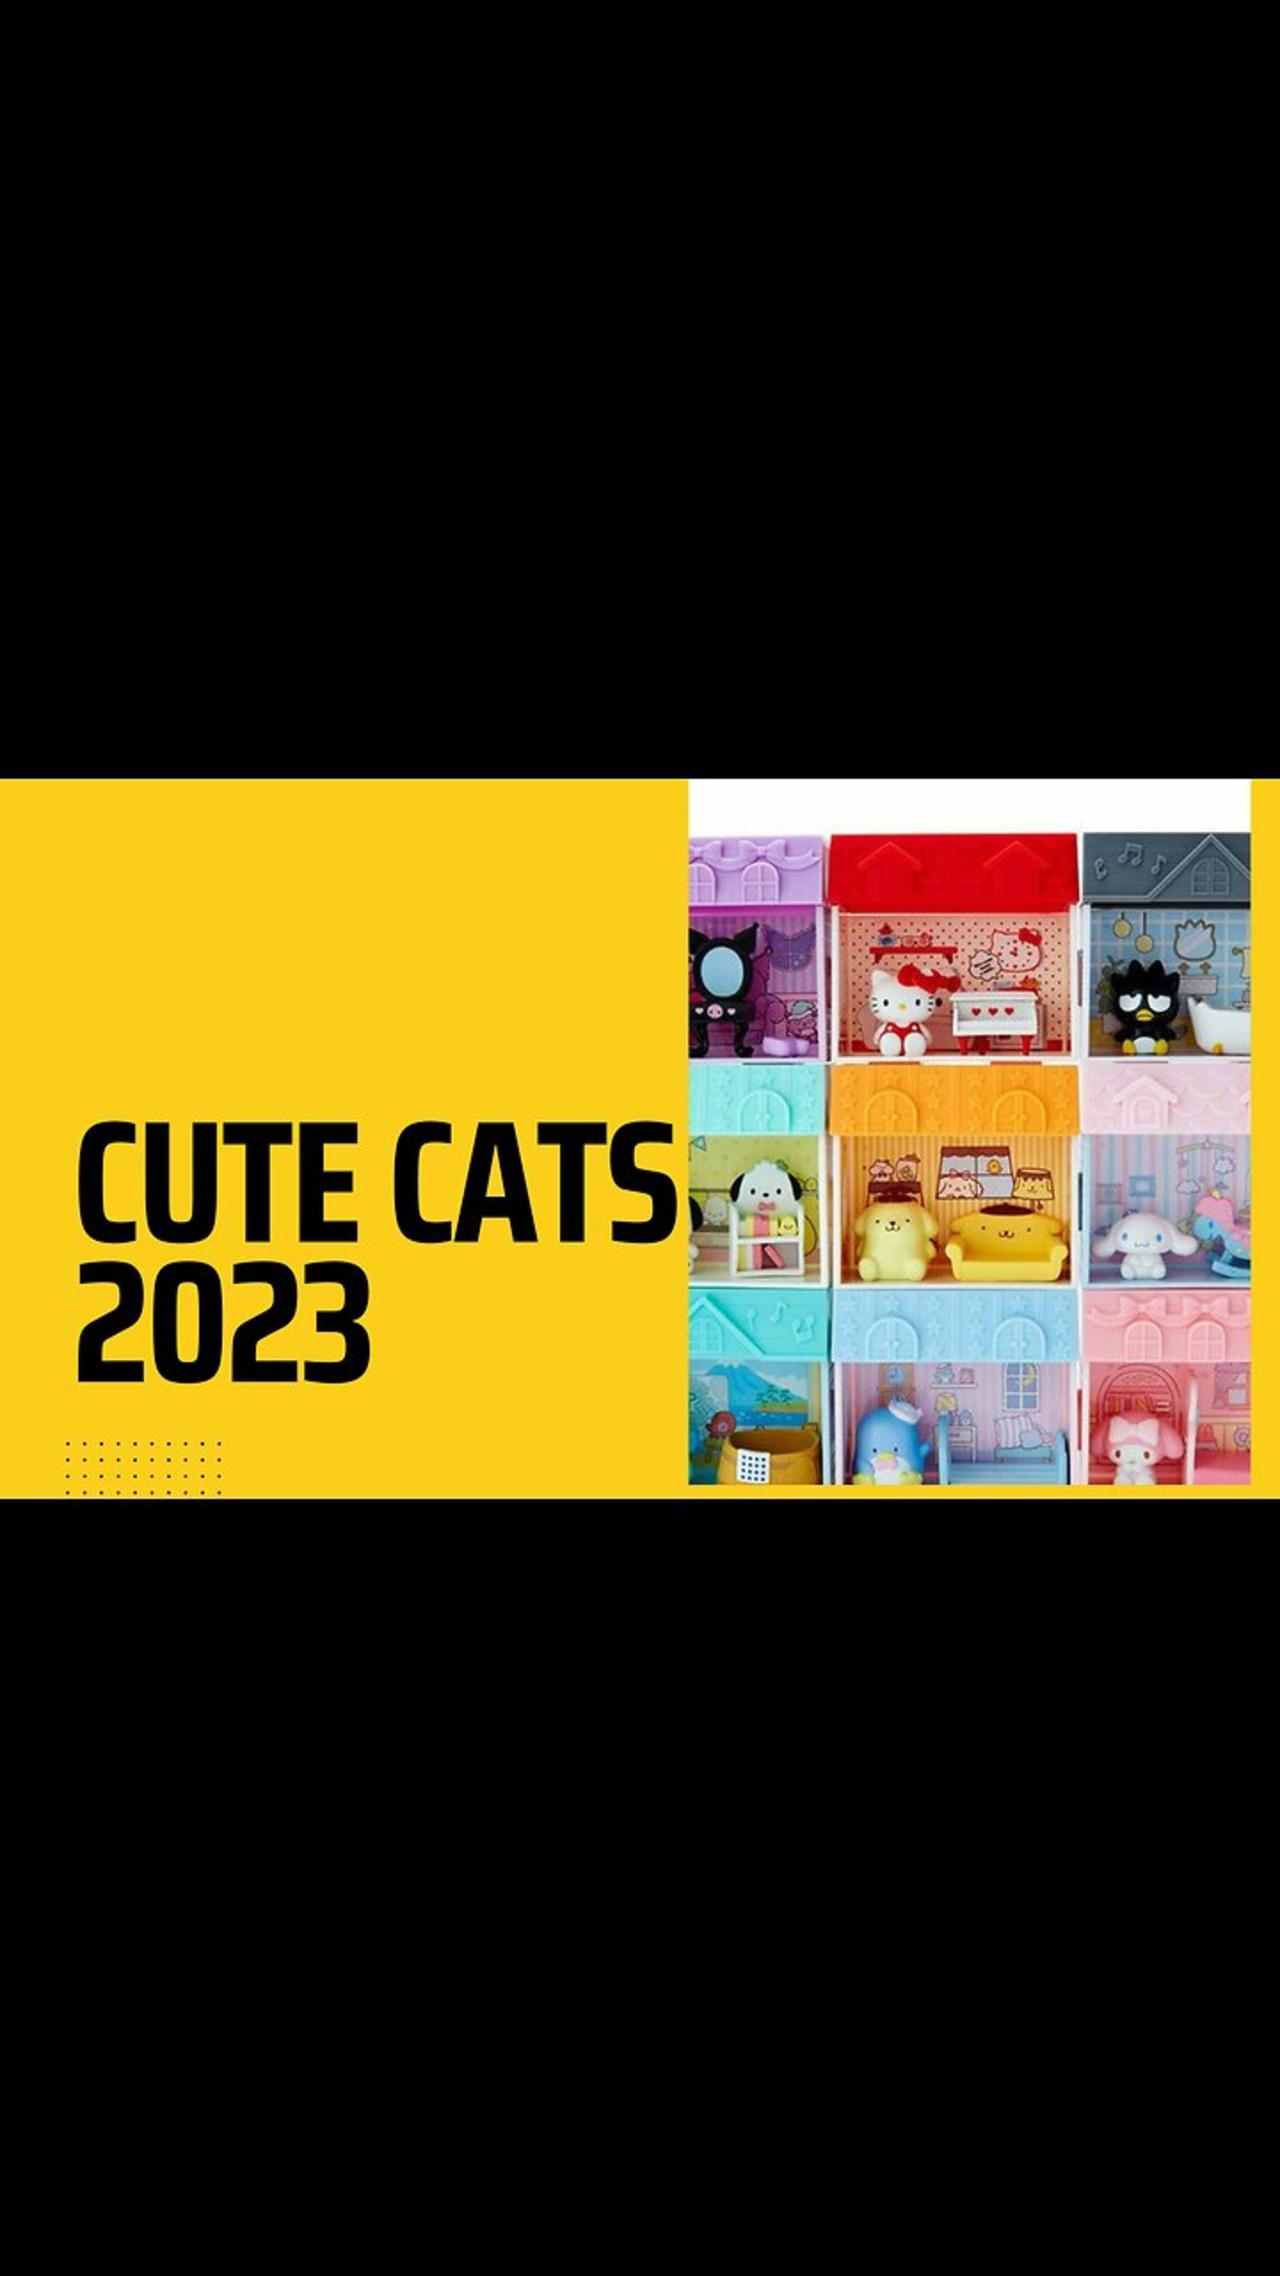 Cute cats 2023! Cute cats playing with baby!try not to laugh😂😂